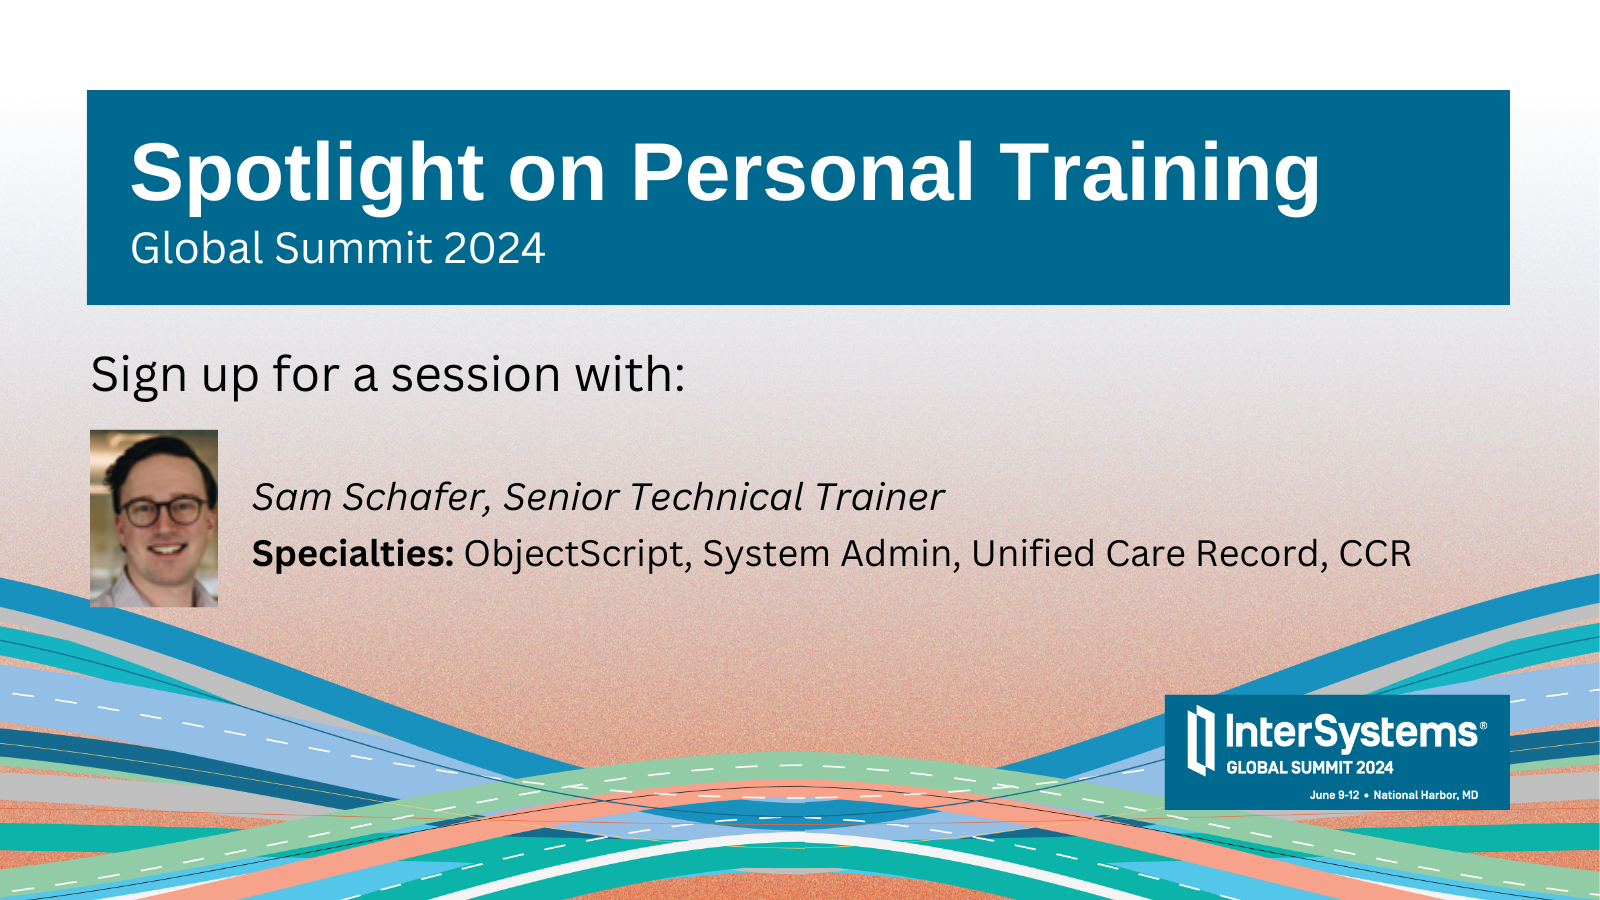 Spotlight on personal training, Global Summit. Sign up for a session with Sam Schafer, Senior Technical Trainer.